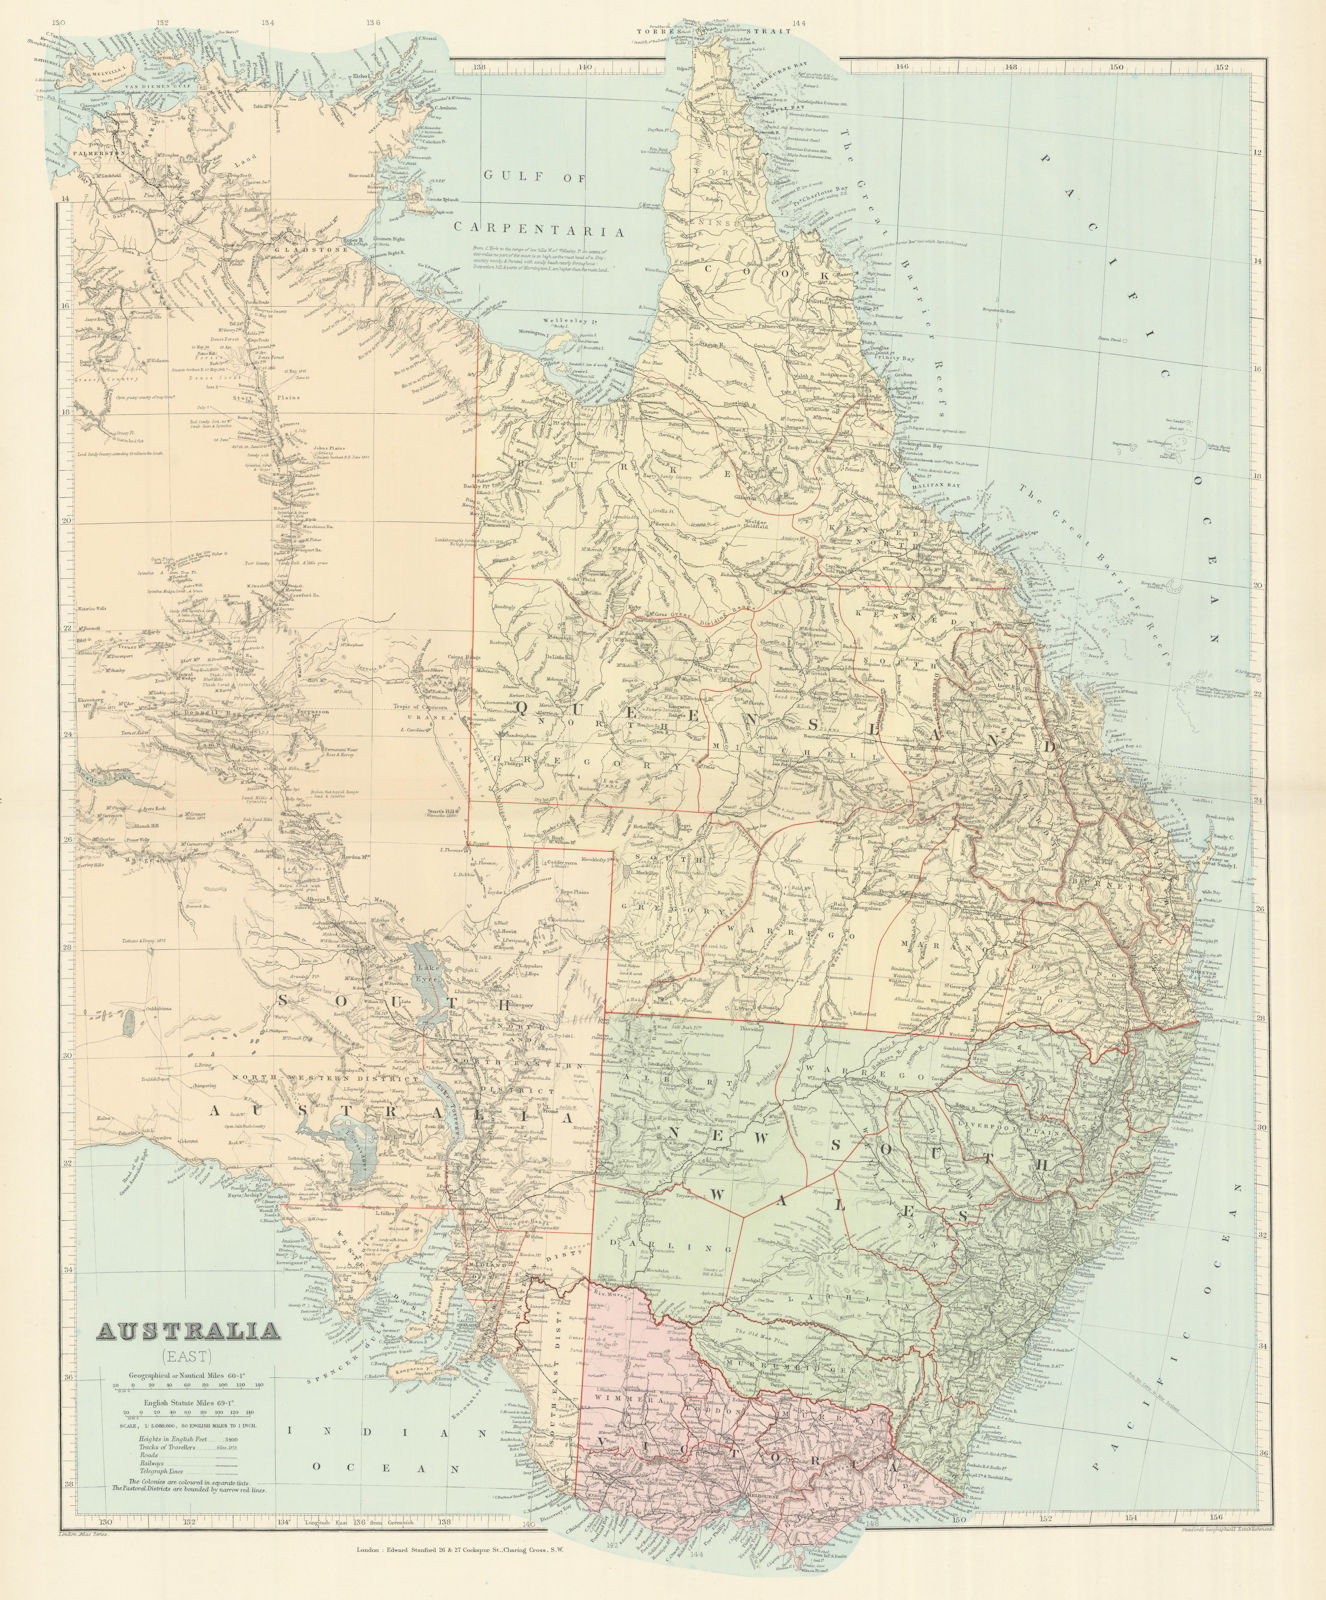 Associate Product Eastern Australia. New South Wales Victoria Queensland. STANFORD 1894 old map